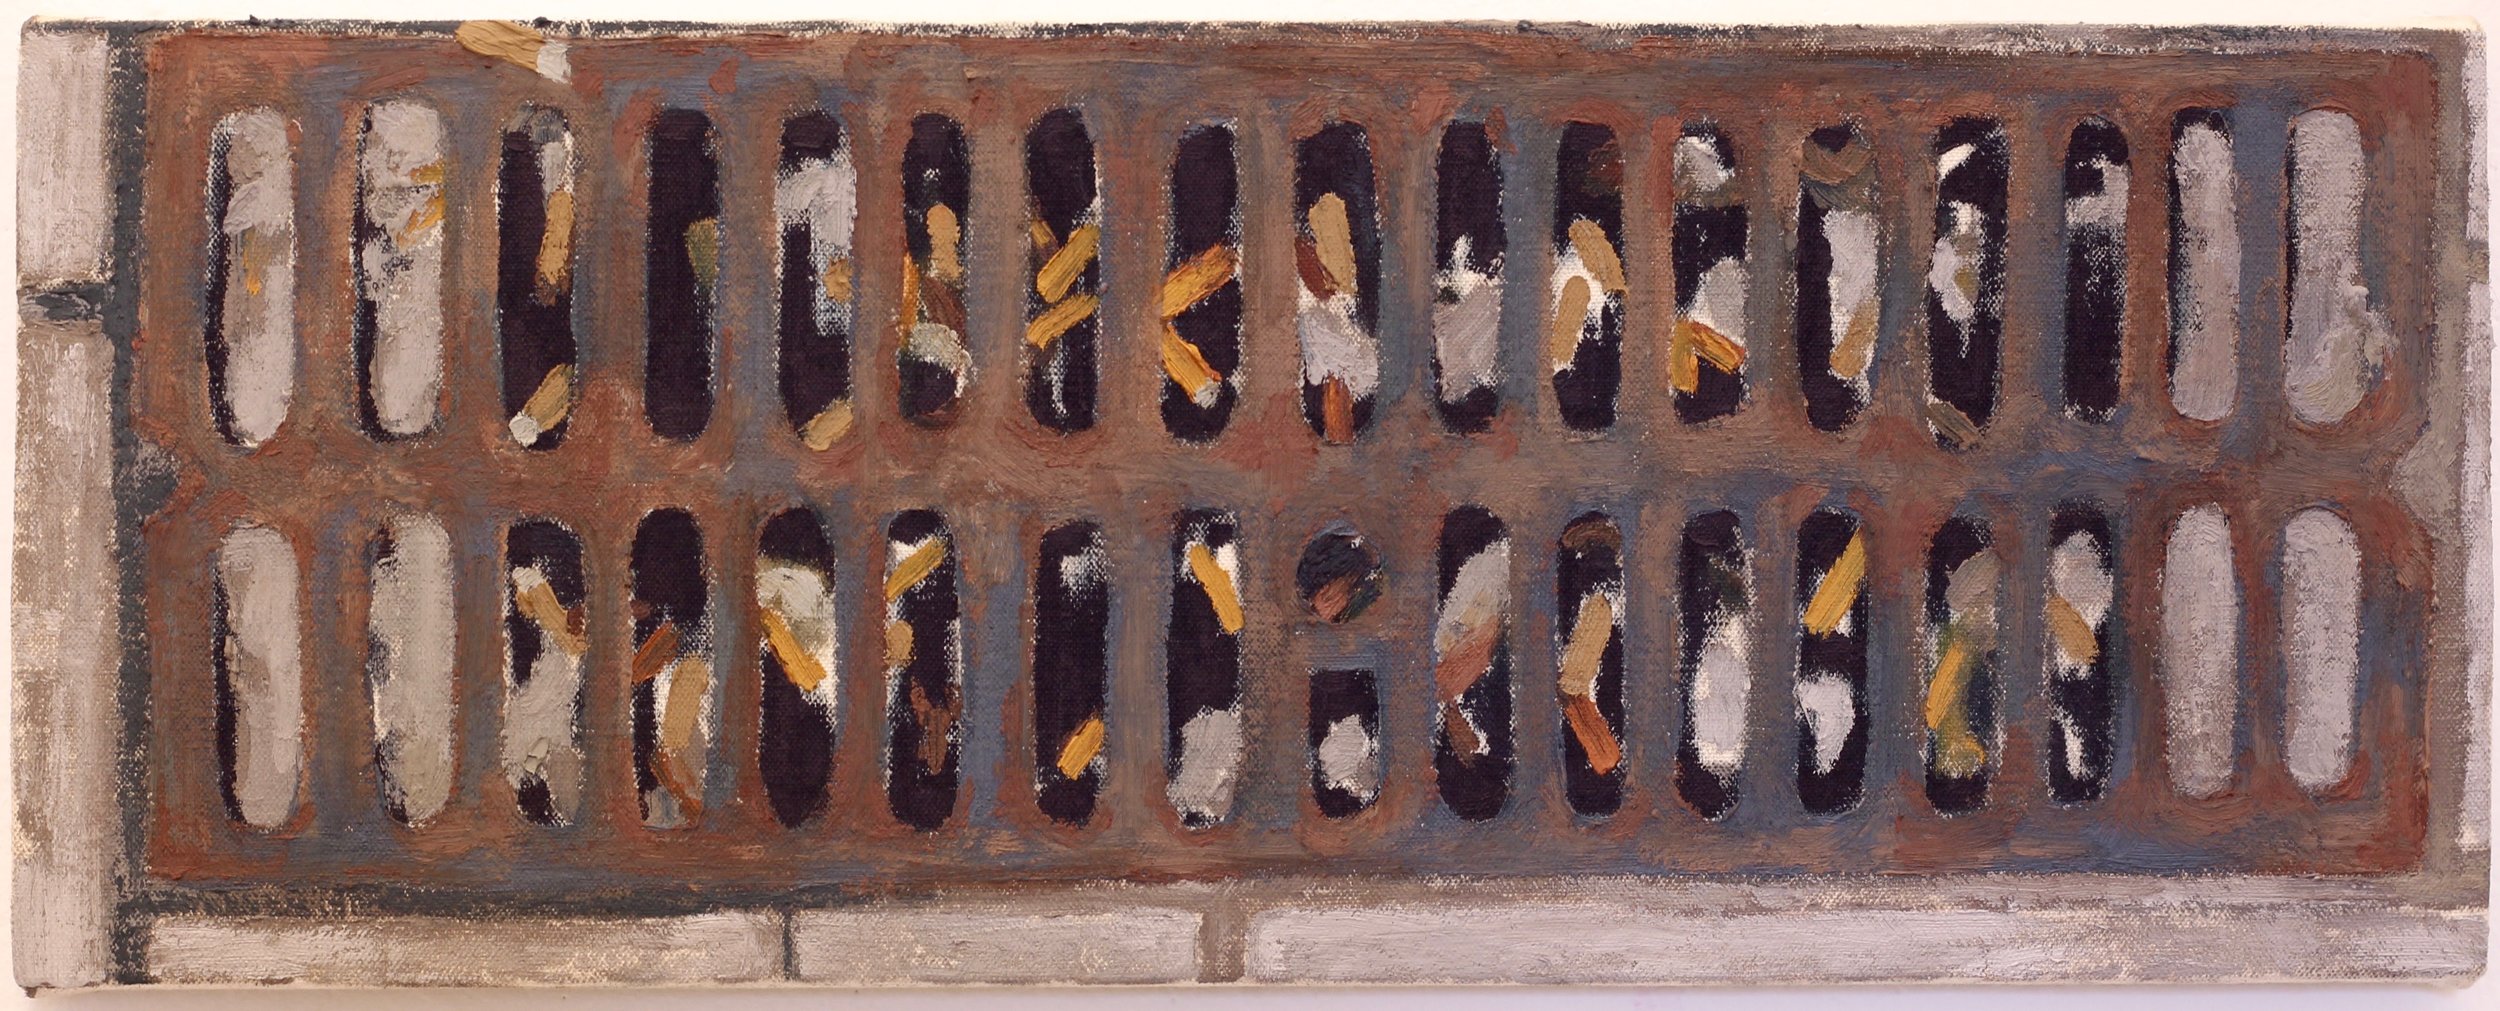 Cigarettes in Drain / 2017 / Oil and Wax on canvas / 8" x 20"